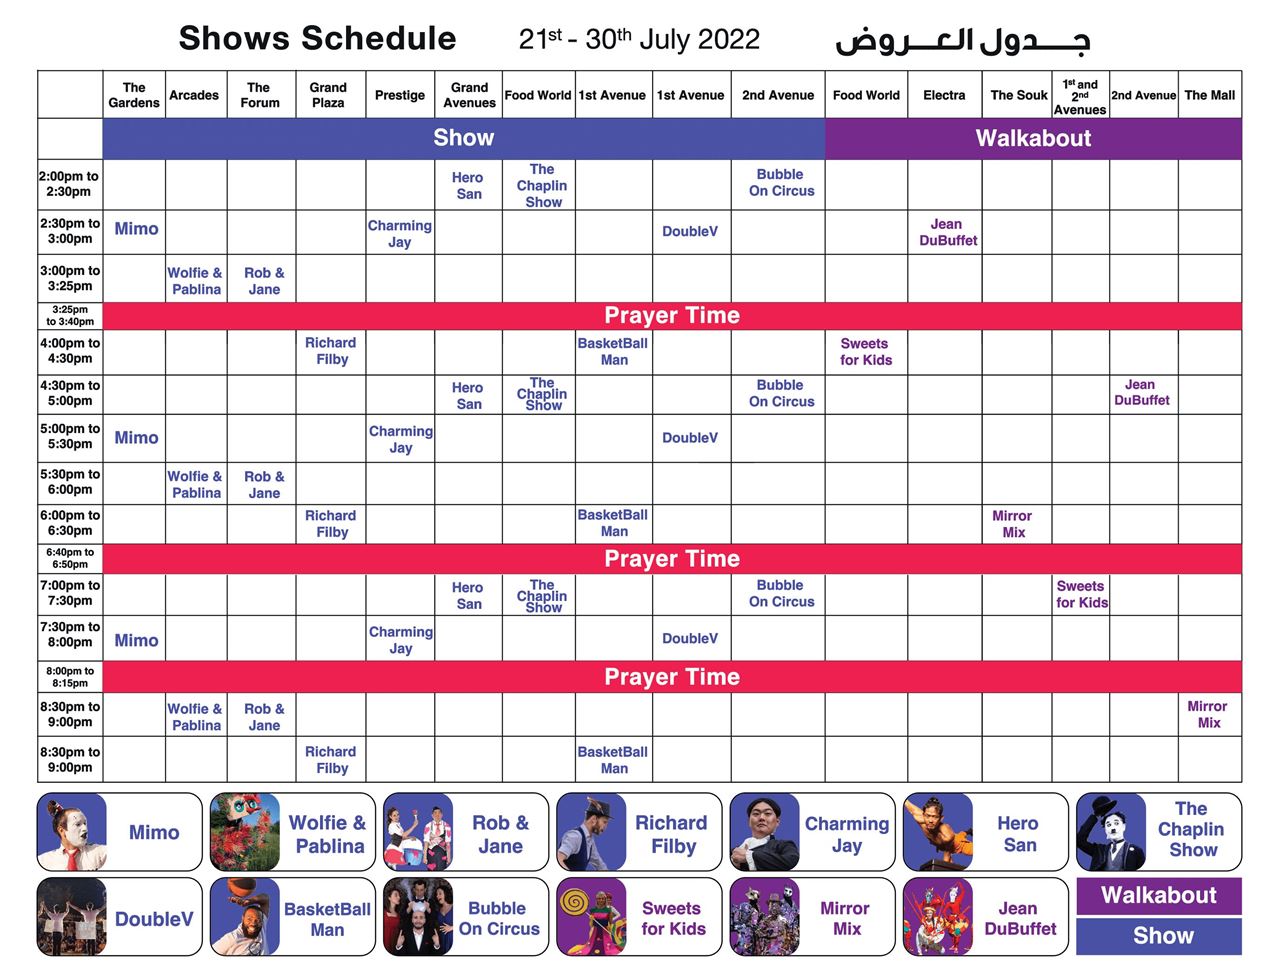 The Avenues Carnival 2022's schedule -  21st to 30th July 2022